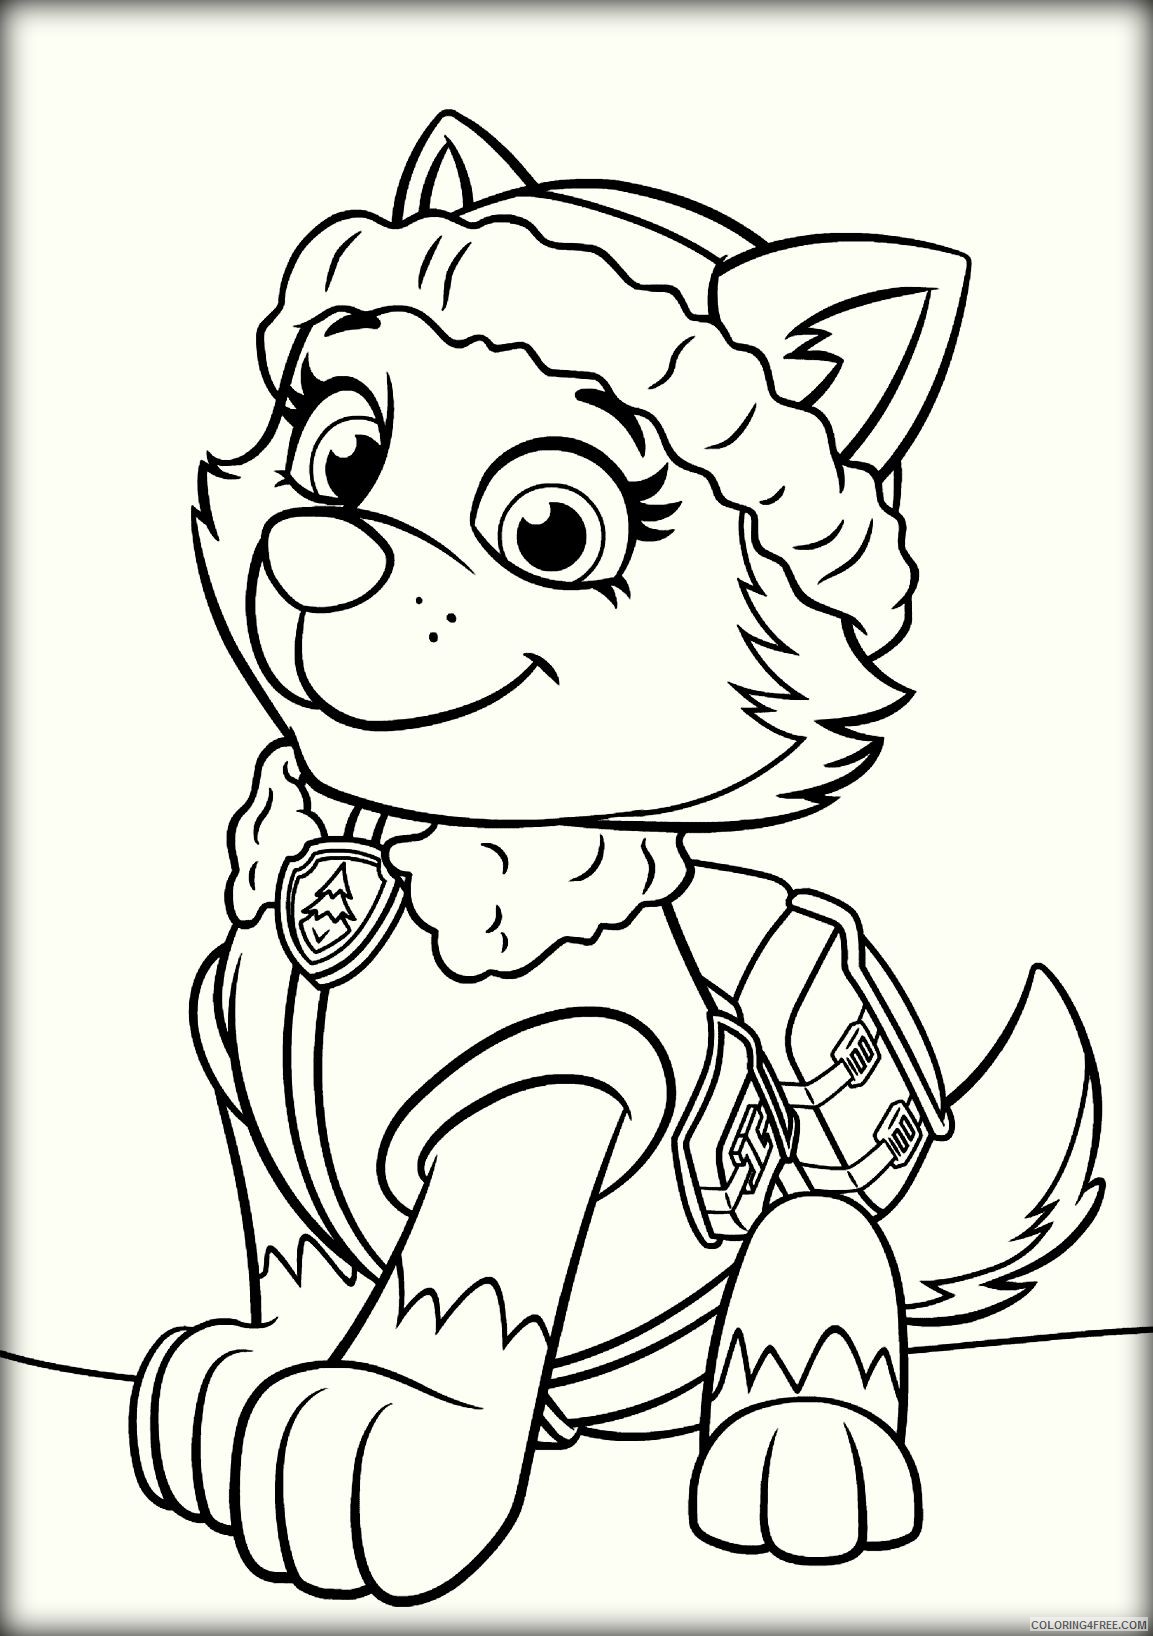 paw patrol everest coloring pages Coloring4free - Coloring4Free.com